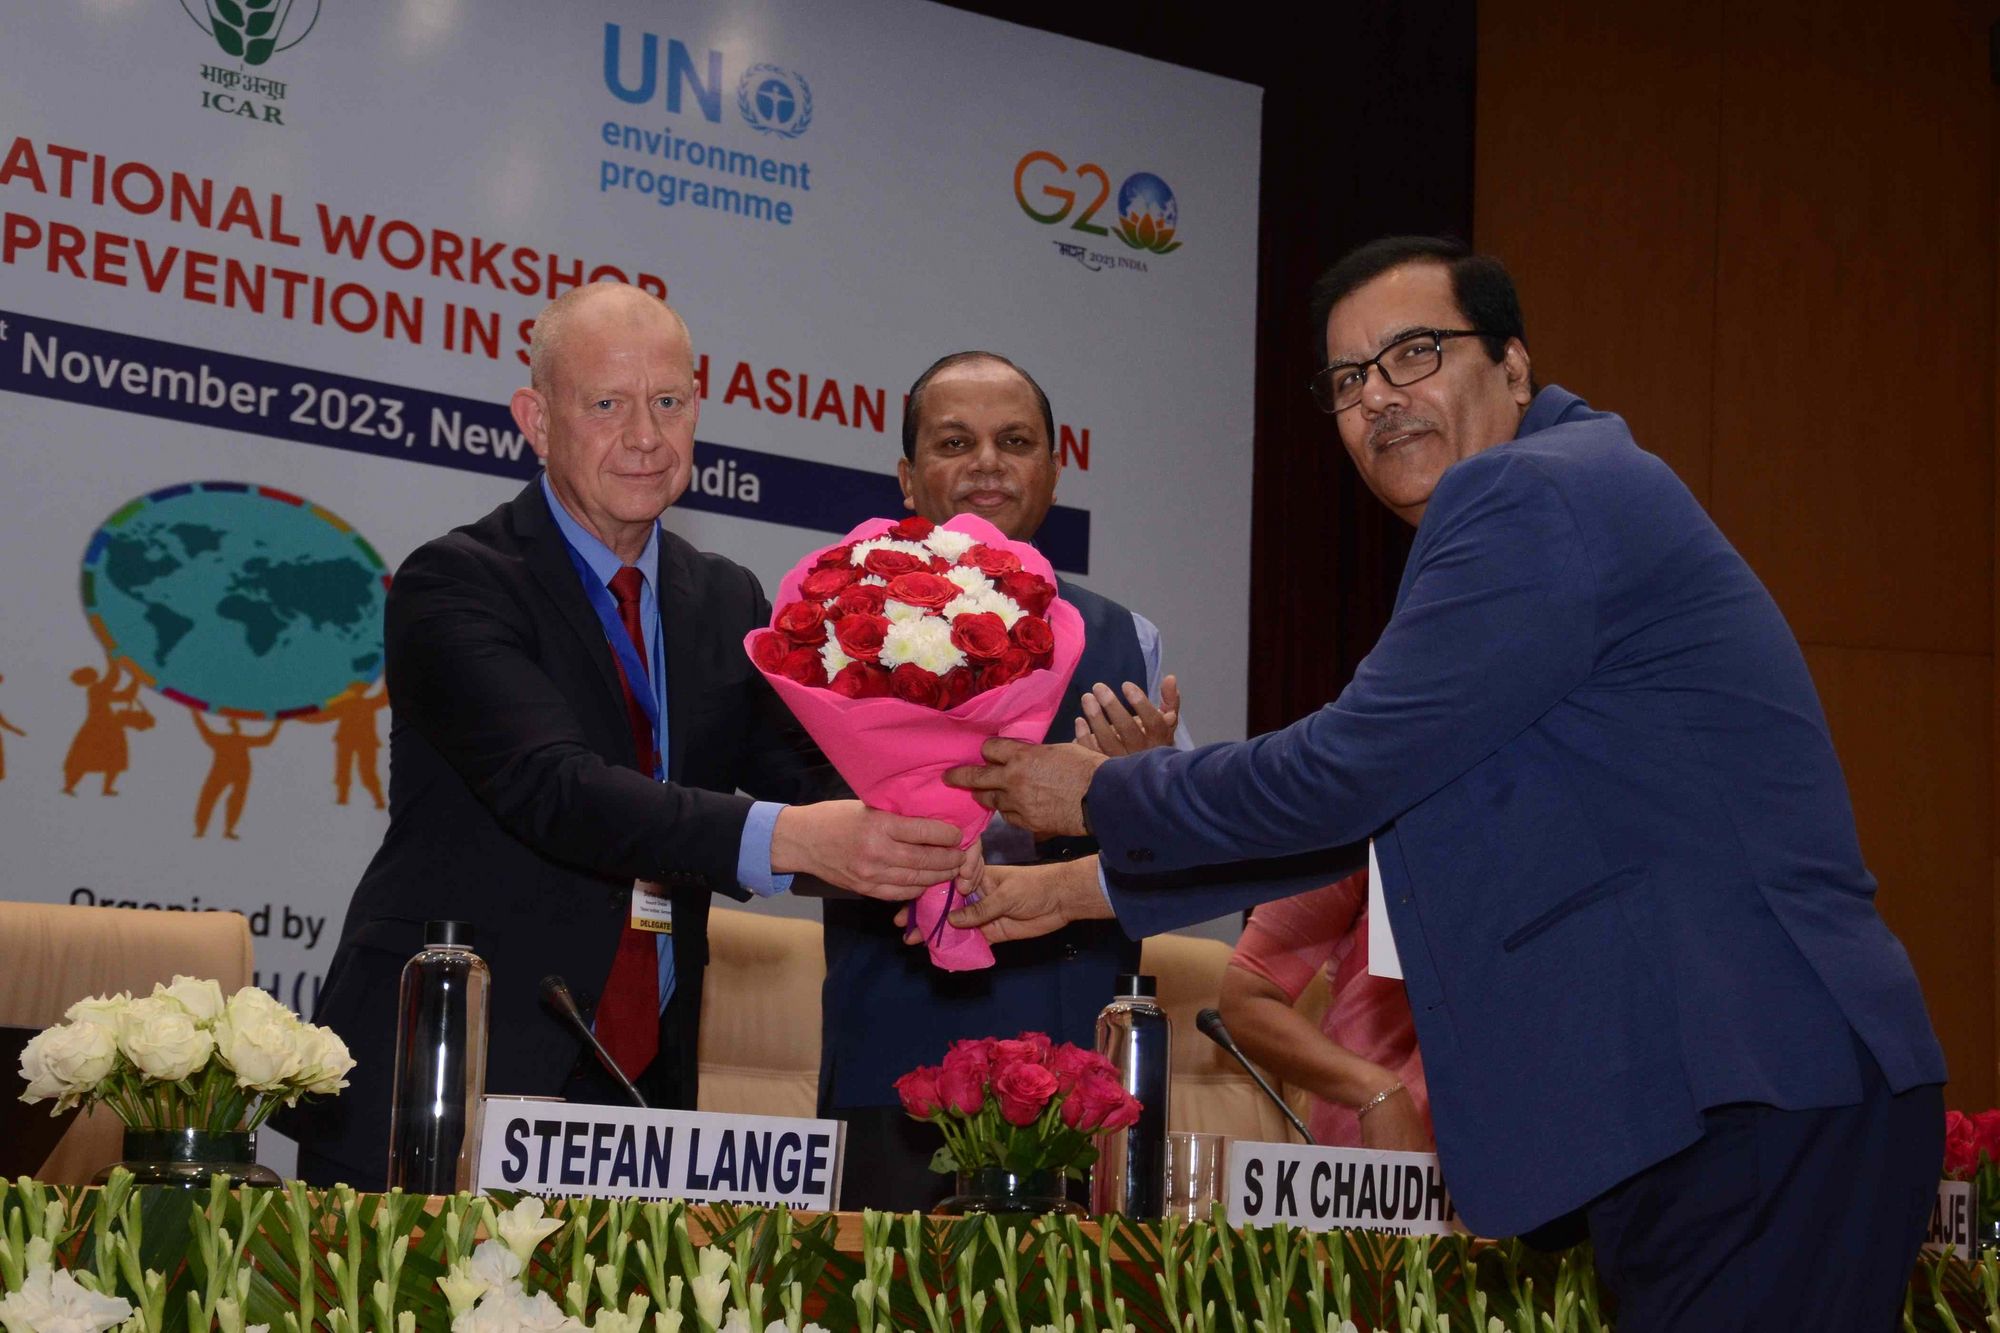 Mr Stefan Lange, Thünen research director, receives flowers by Dr SN Jha, Deputy Director General, and Dr SK Chaudhari, Deputy Director General, both Indian Council of Agricultural Research. 